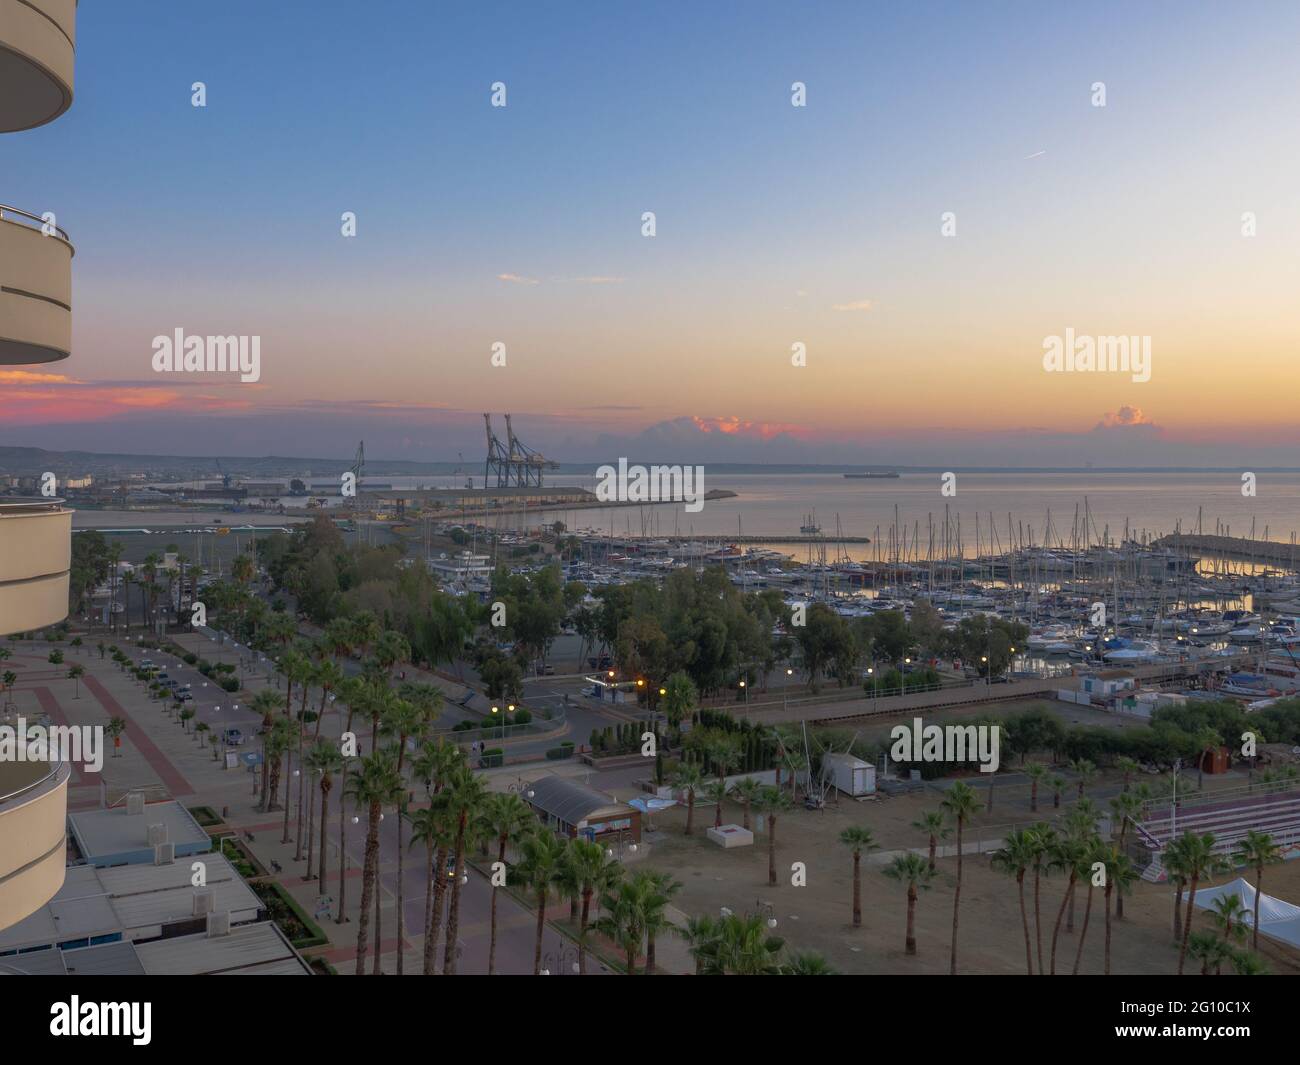 Top aerial view overlooking the sunrise at Finikoudes Palm tree promenade and pier with yachts near the Mediterranean sea in Larnaca city, Cyprus. Stock Photo